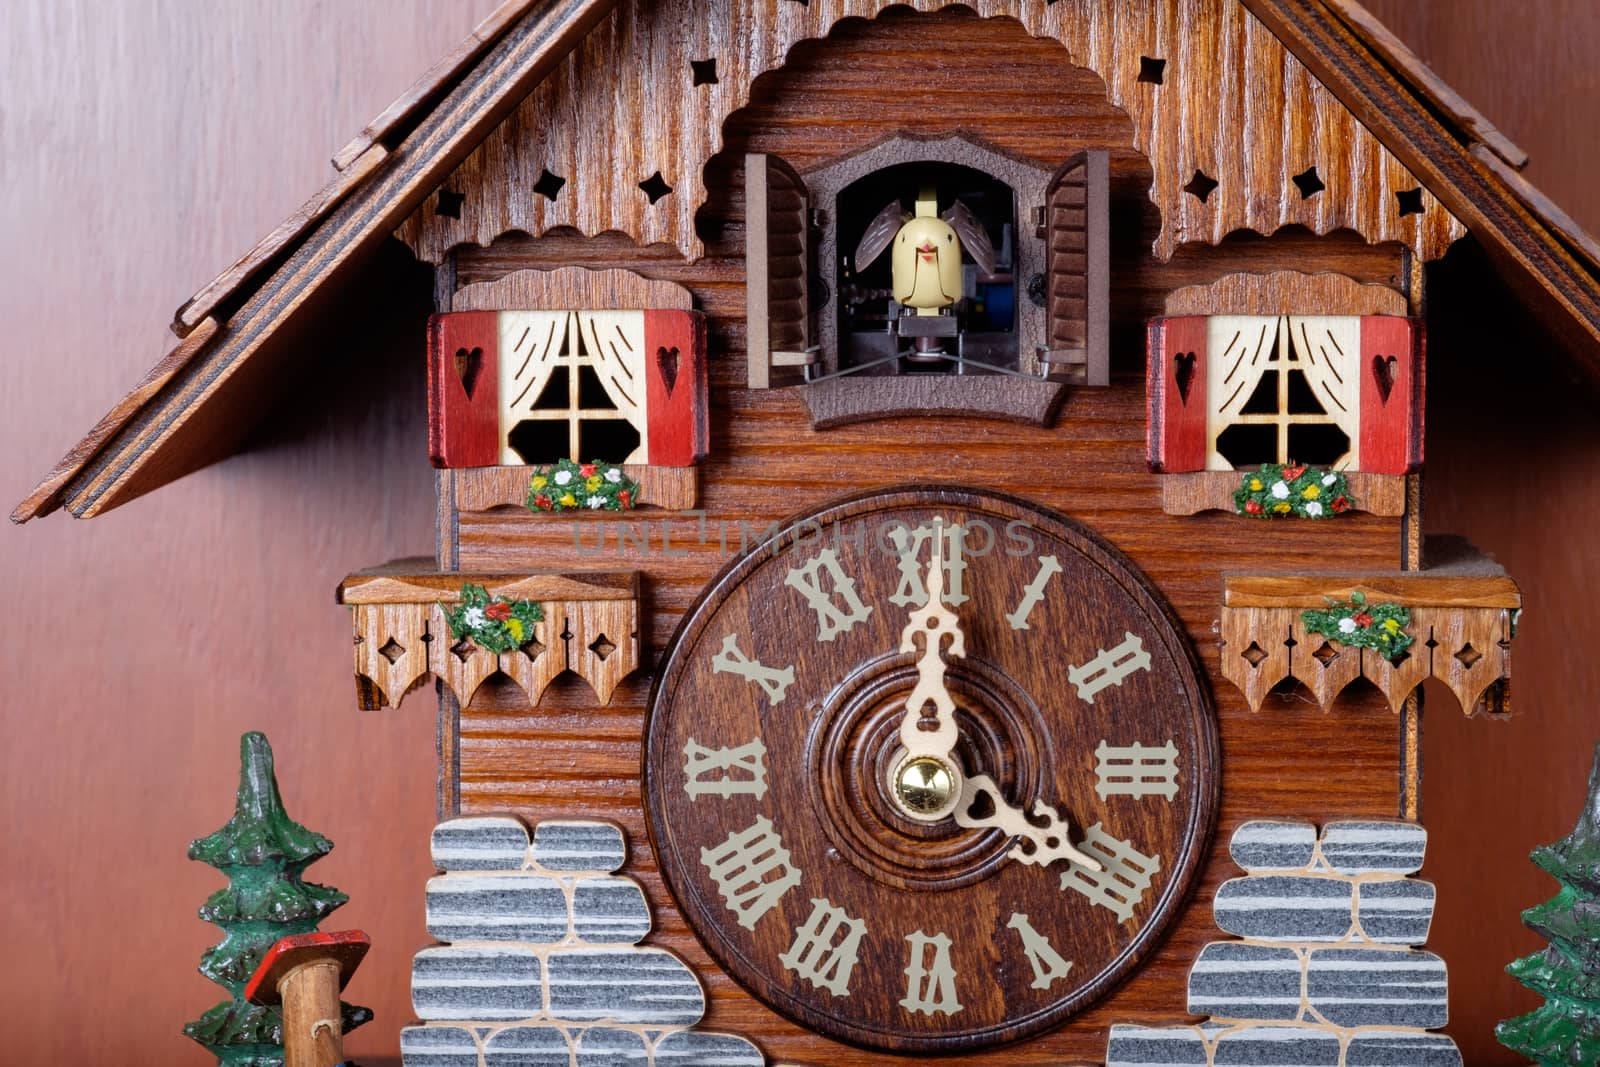 Cuckoo clock with birdie out of house made by crafted wooden